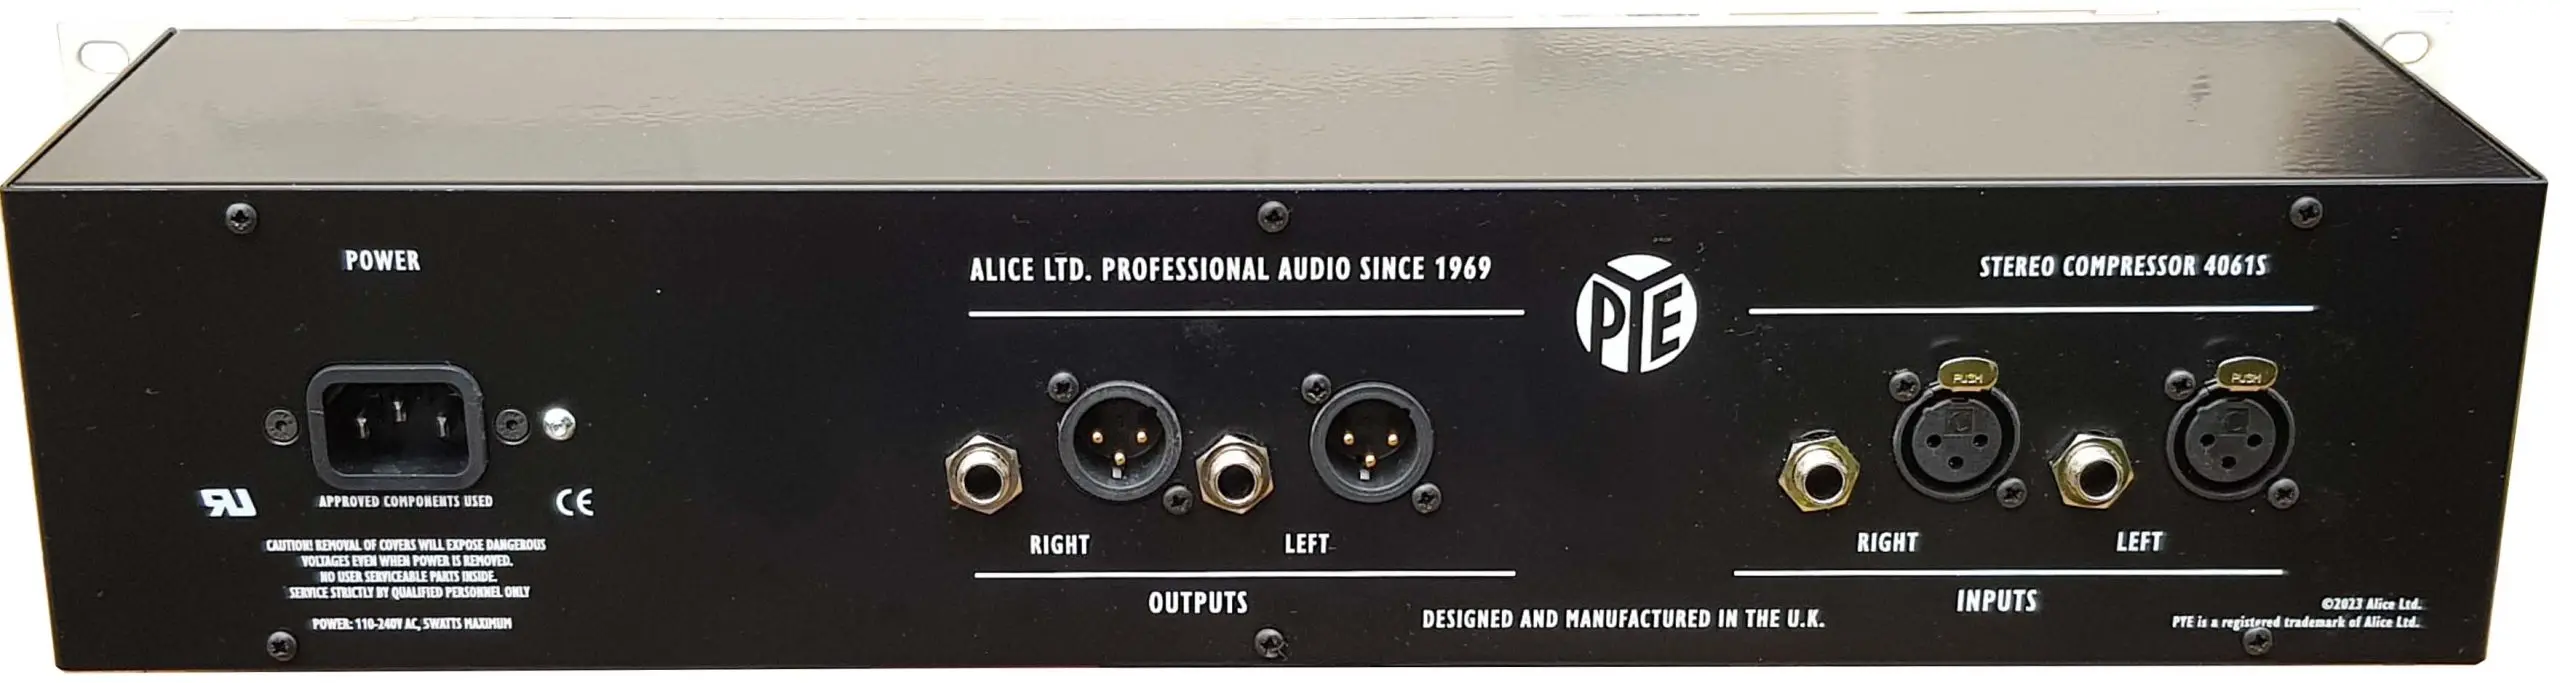 Rear sockets of the Pye 4061S analogue limiter-compressor